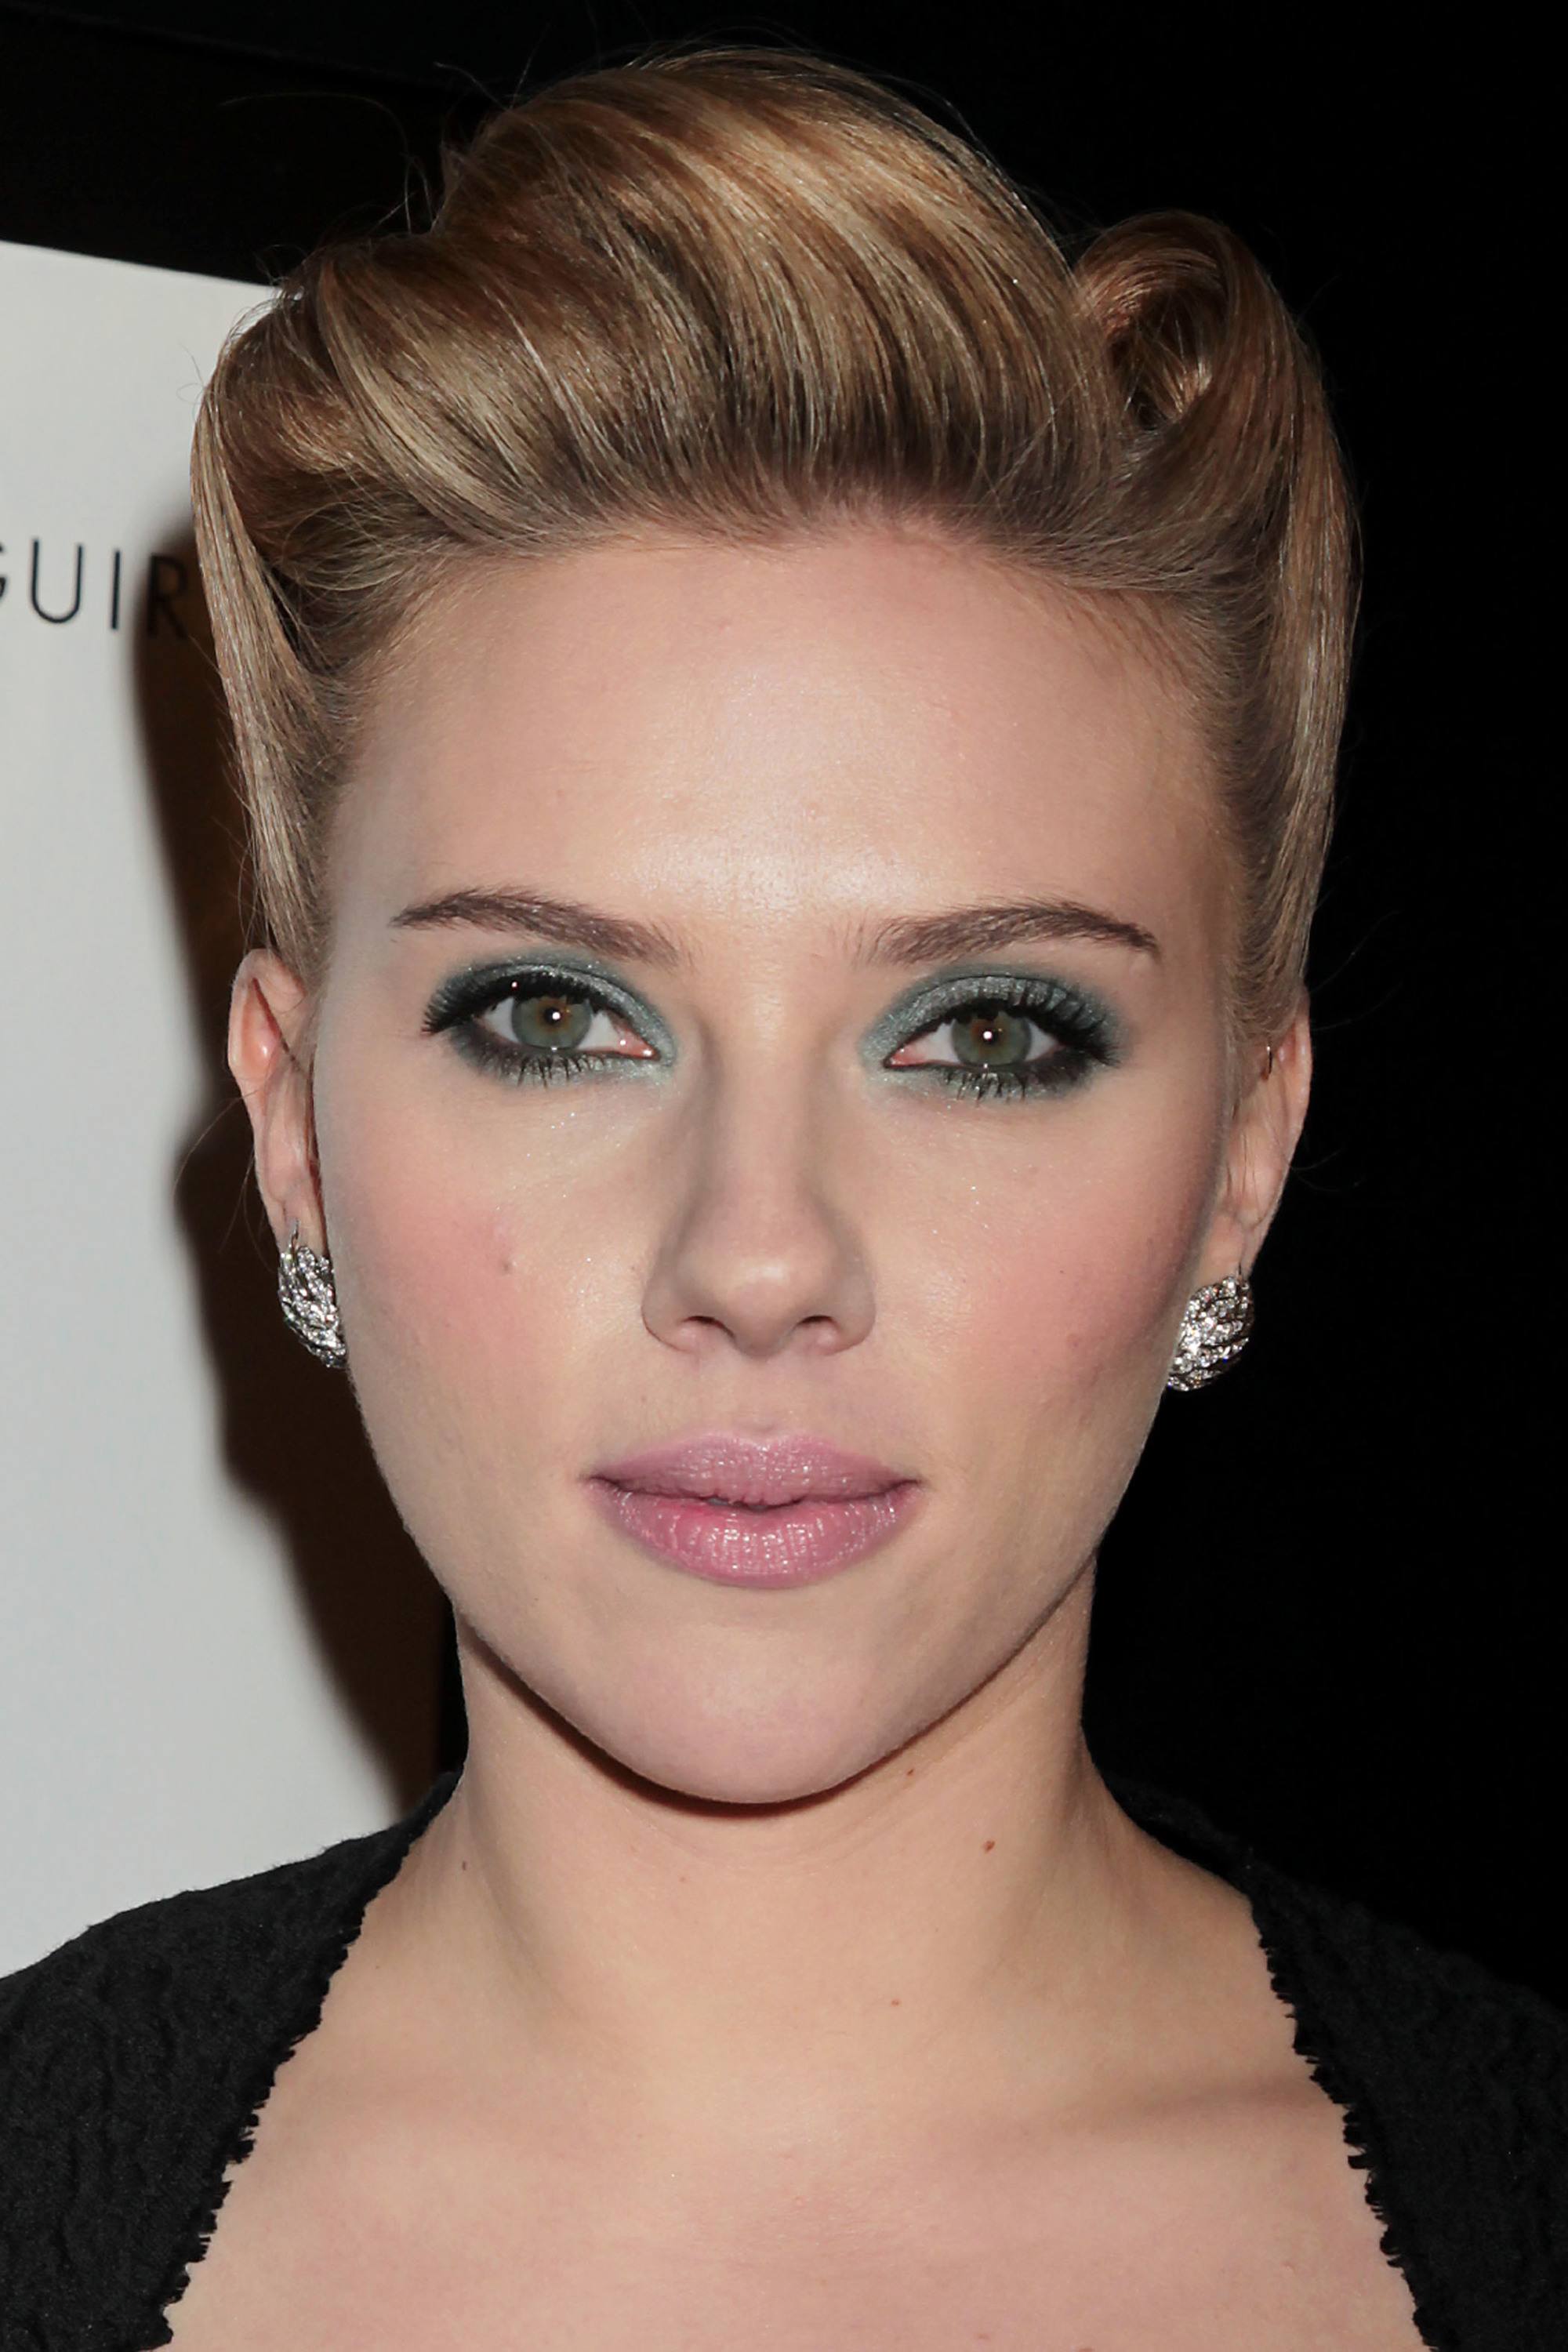 Scarlett Johansson with green eyeshadow and pink lipstick and a rockabilly hairstyle